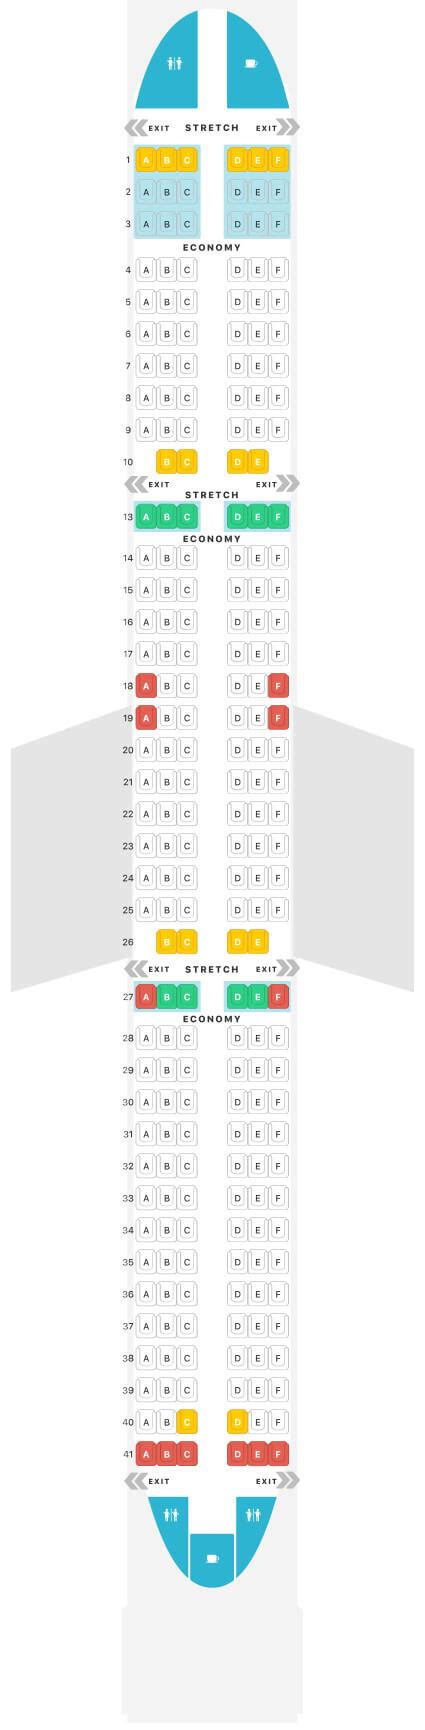 Frontier A321 Seat Map Airportix